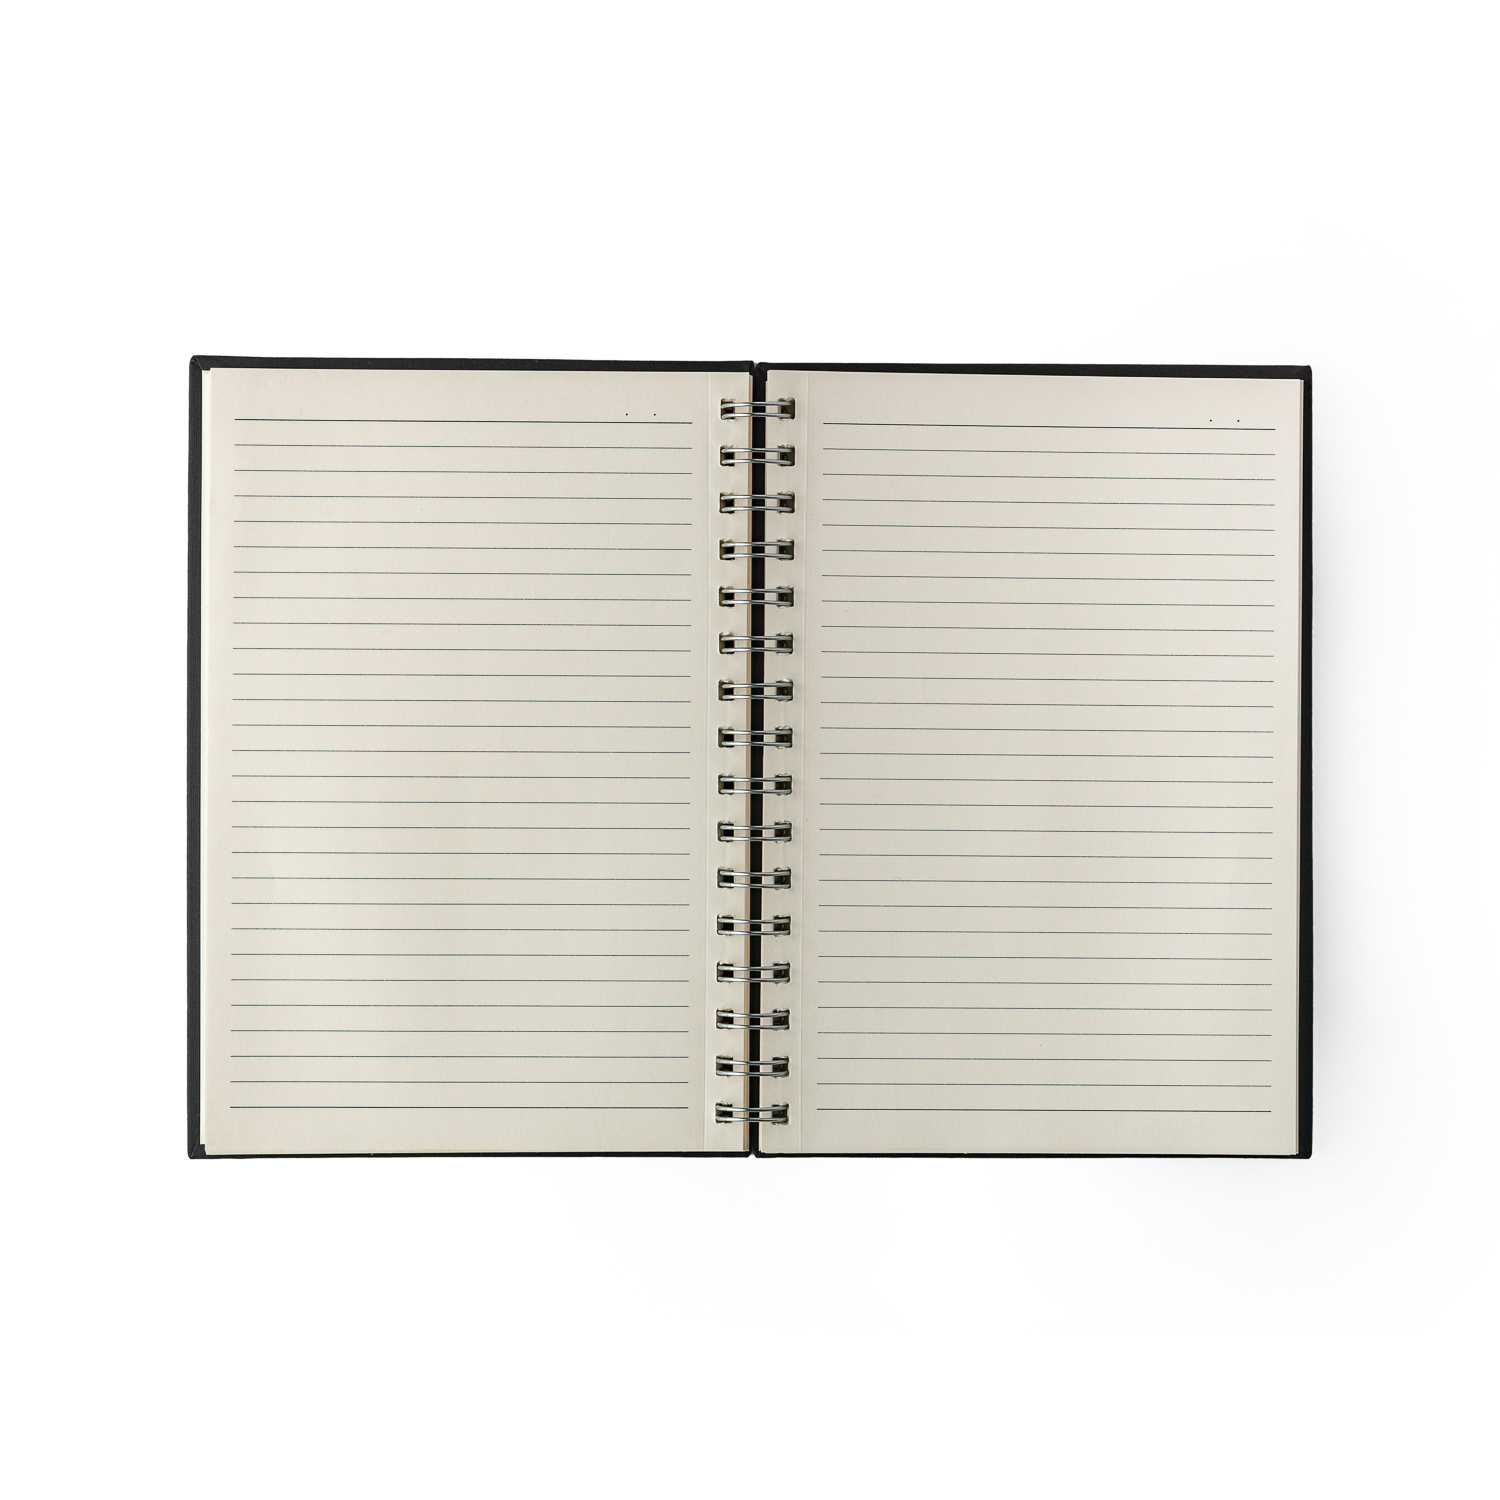 Comma Weave - A5 Size - Wire-O-Bound Notebook (Black)